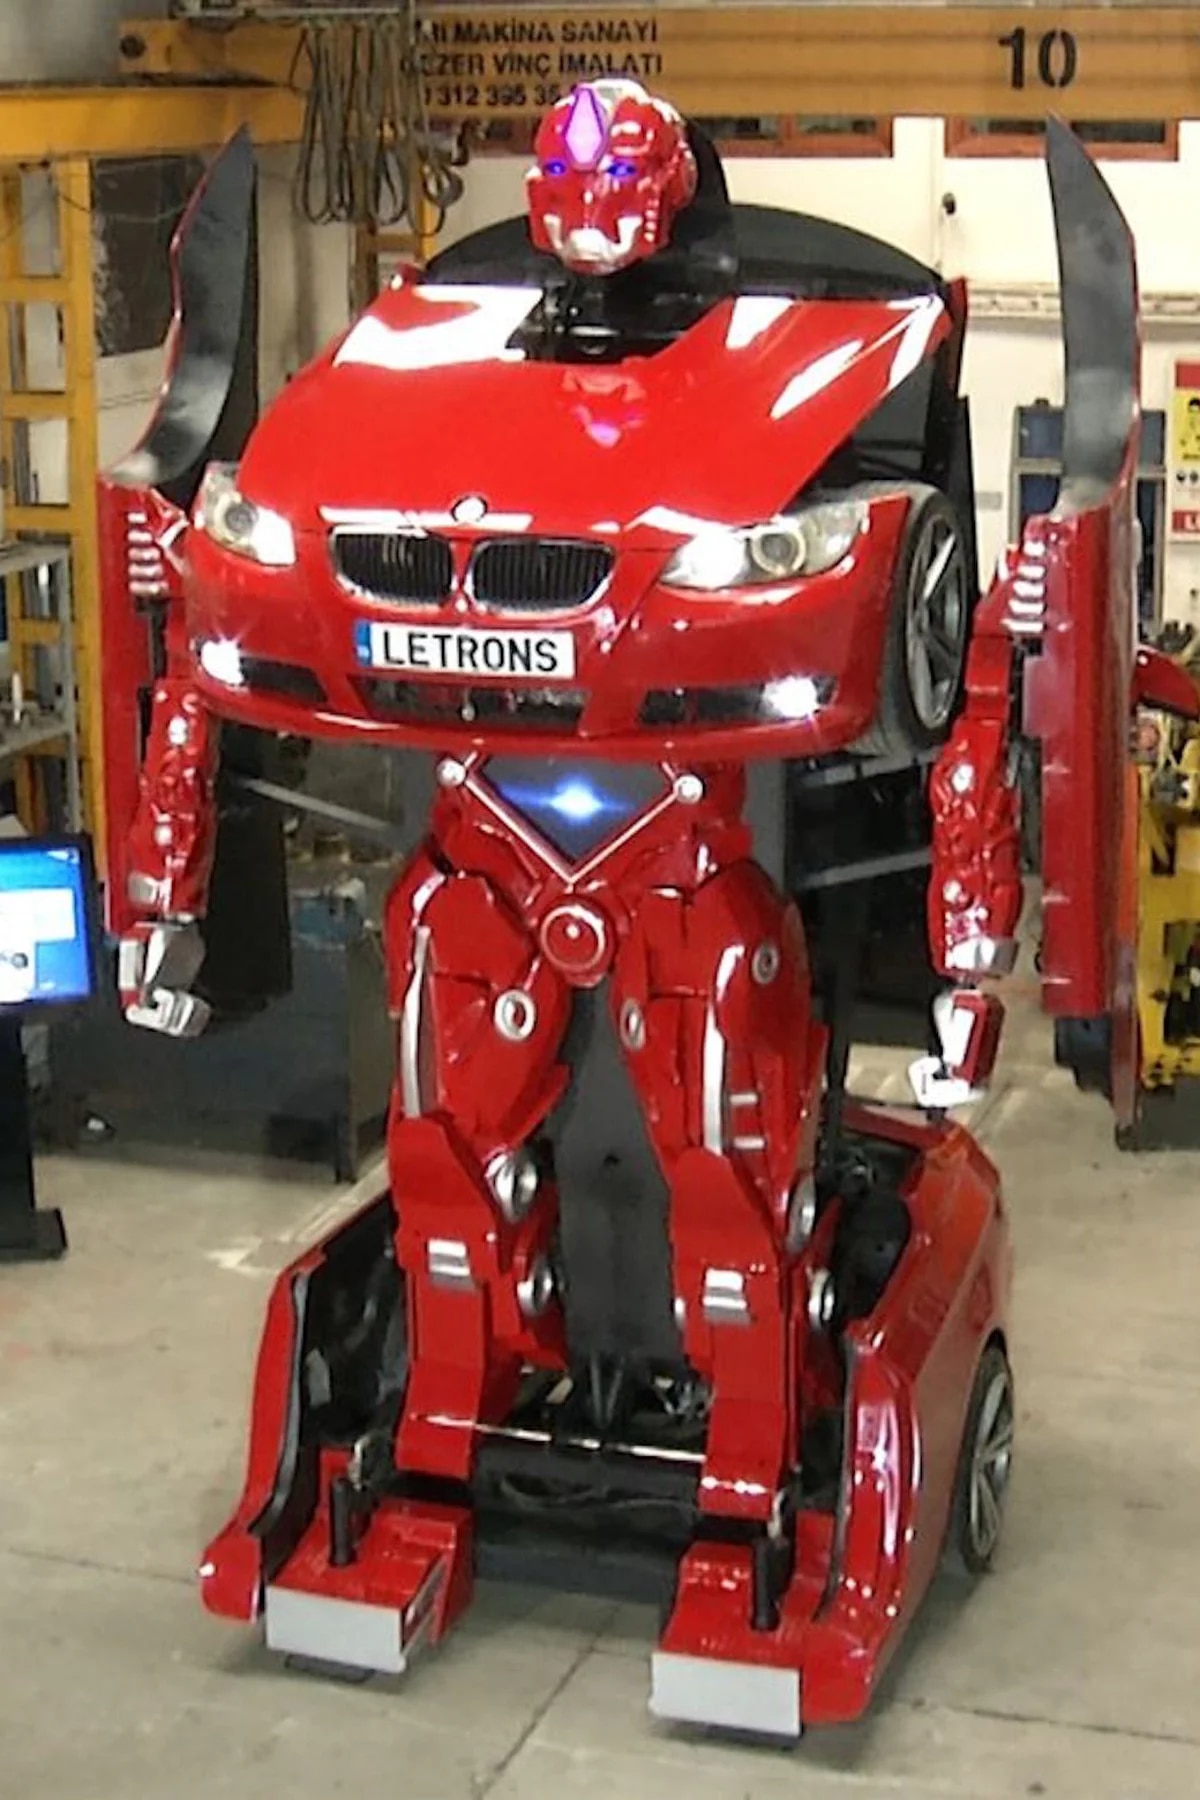 Real-life Transformers car changes from sporty BMW into a robot - and then starts chatting away - VGO News